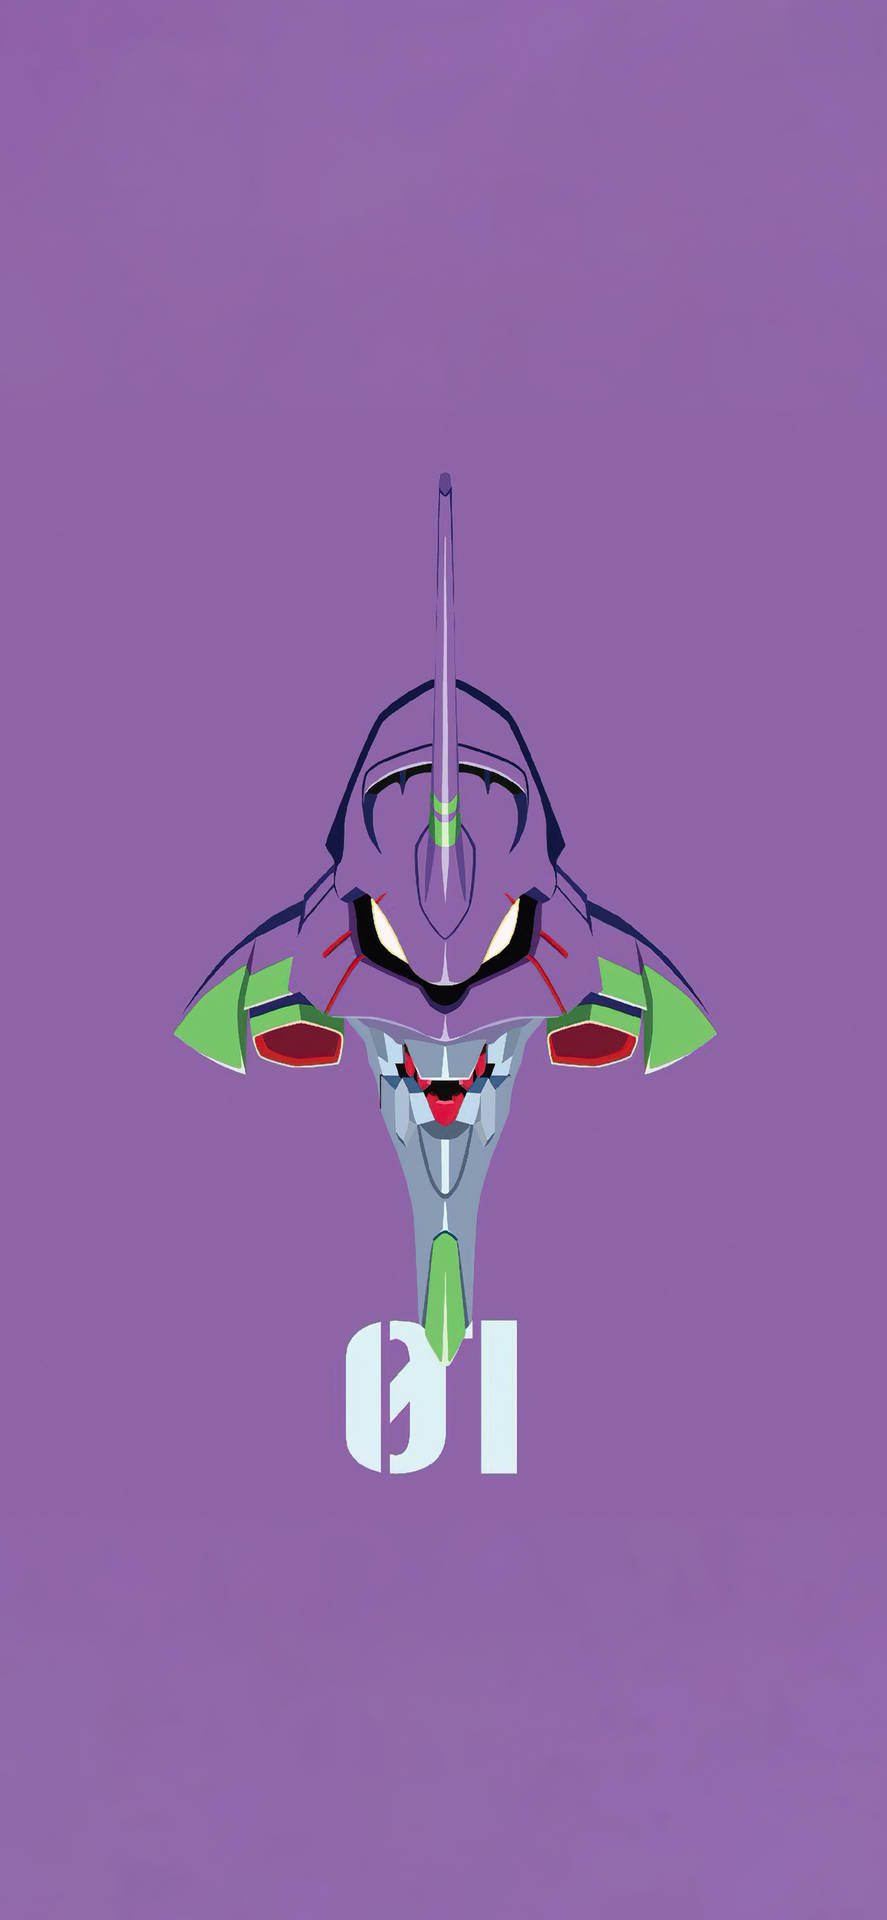 GainAnswers Evangelion Phone - Keeping Your Business Connected Wallpaper